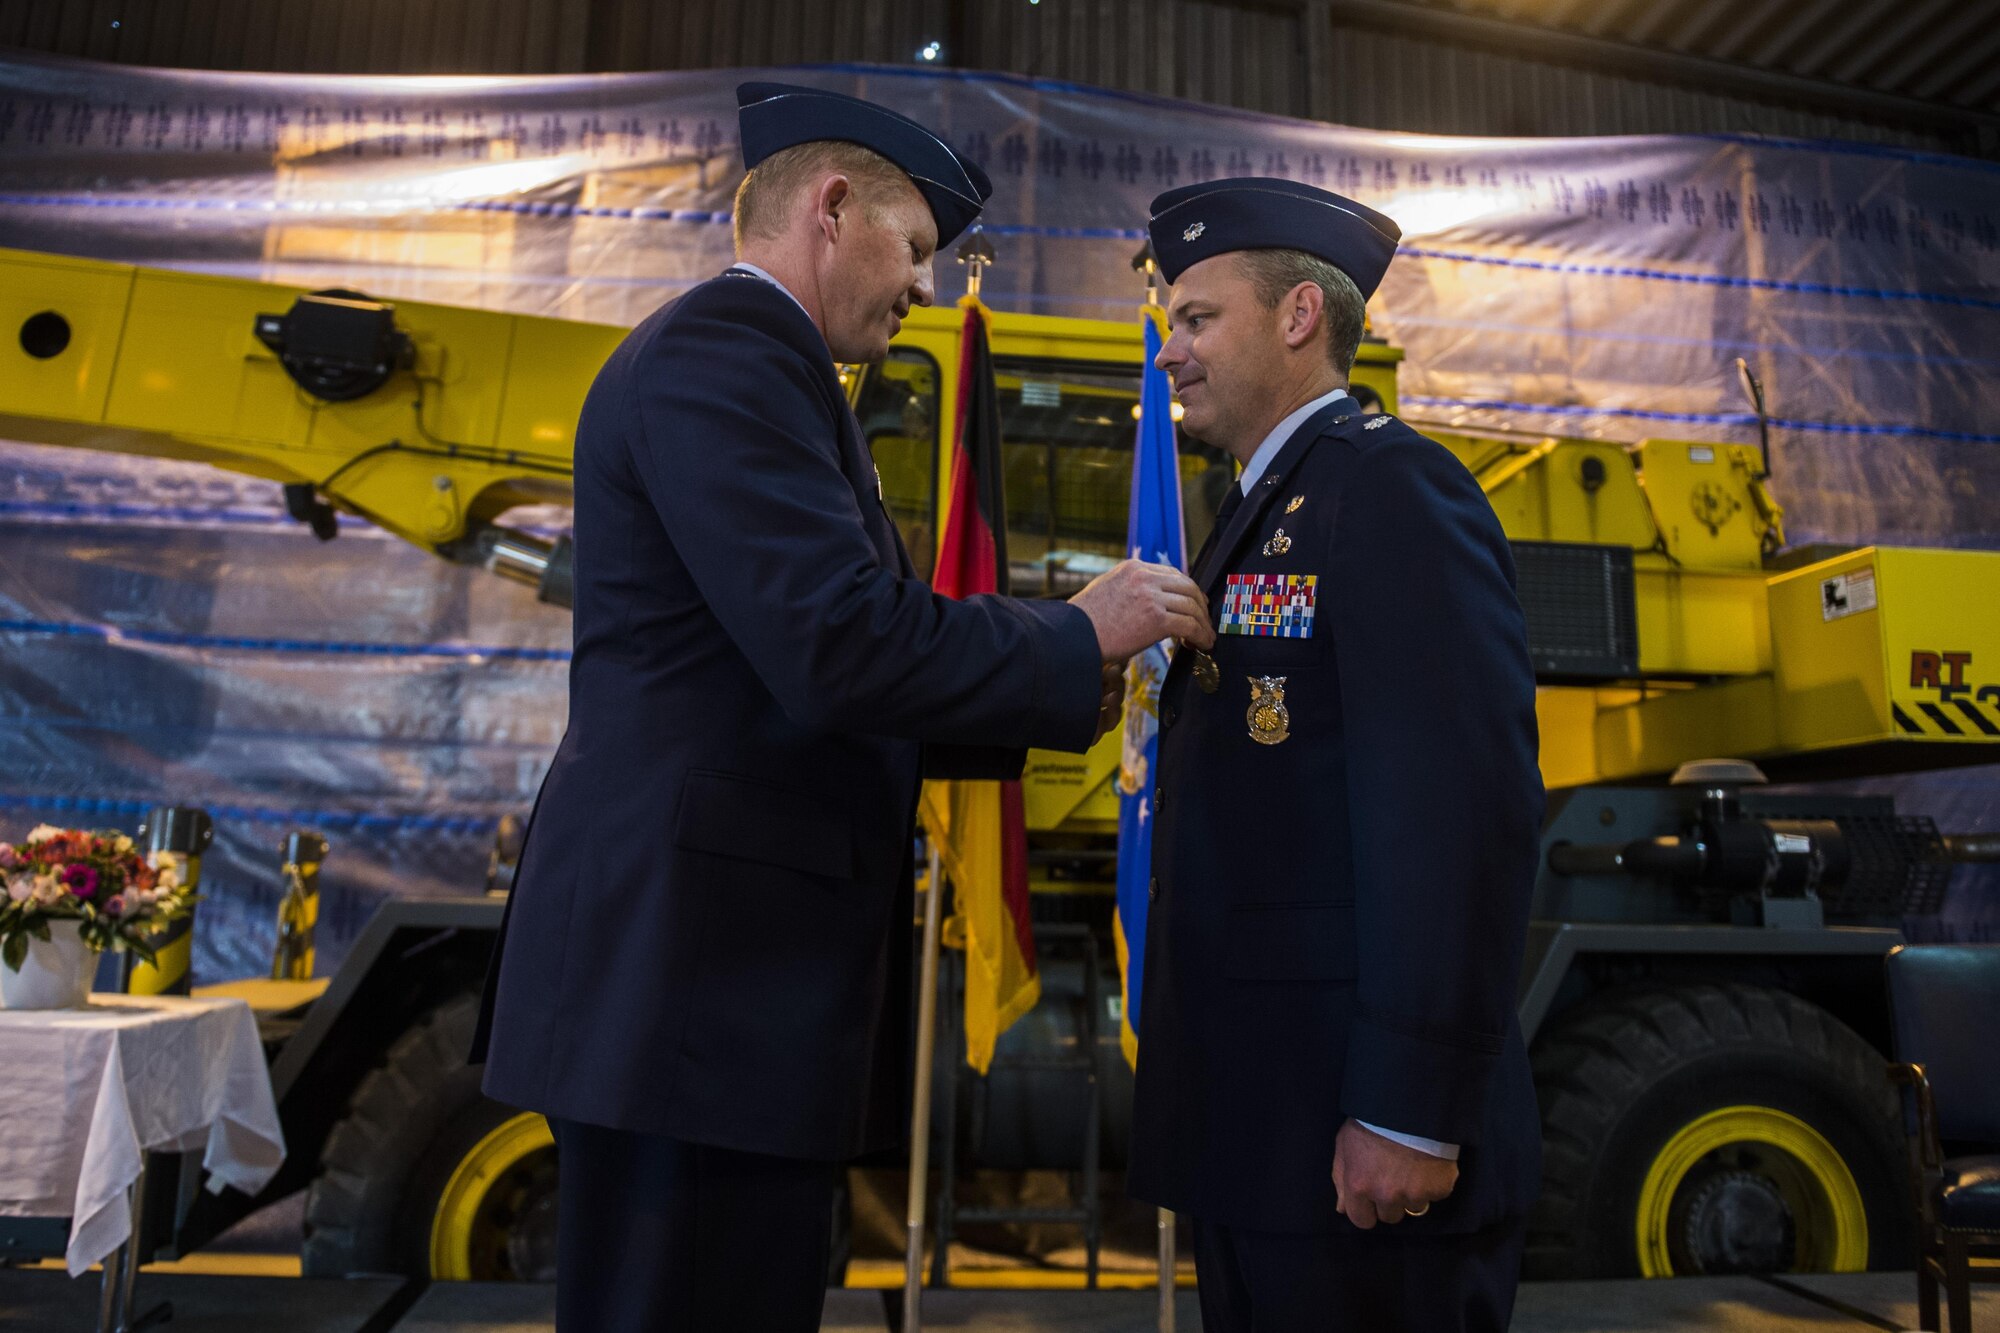 U.S. Air Force Col. Joe McFall, 52nd Fighter Wing commander, left, pins a Meritorious Service Medal on U.S. Air Force Lt. Col. Christopher Meeker, former 52nd Civil Engineer Squadron commander, during the 52nd CES change of command at Spangdahlem Air Base, Germany, June 1, 2016. The Meritorious Service Medal is awarded to members of the Armed Forces of the United States and friendly foreign nations who distinguished themselves by outstanding noncombat meritorious achievement. (U.S. Air Force photo by Senior Airman Luke Kitterman/Released)